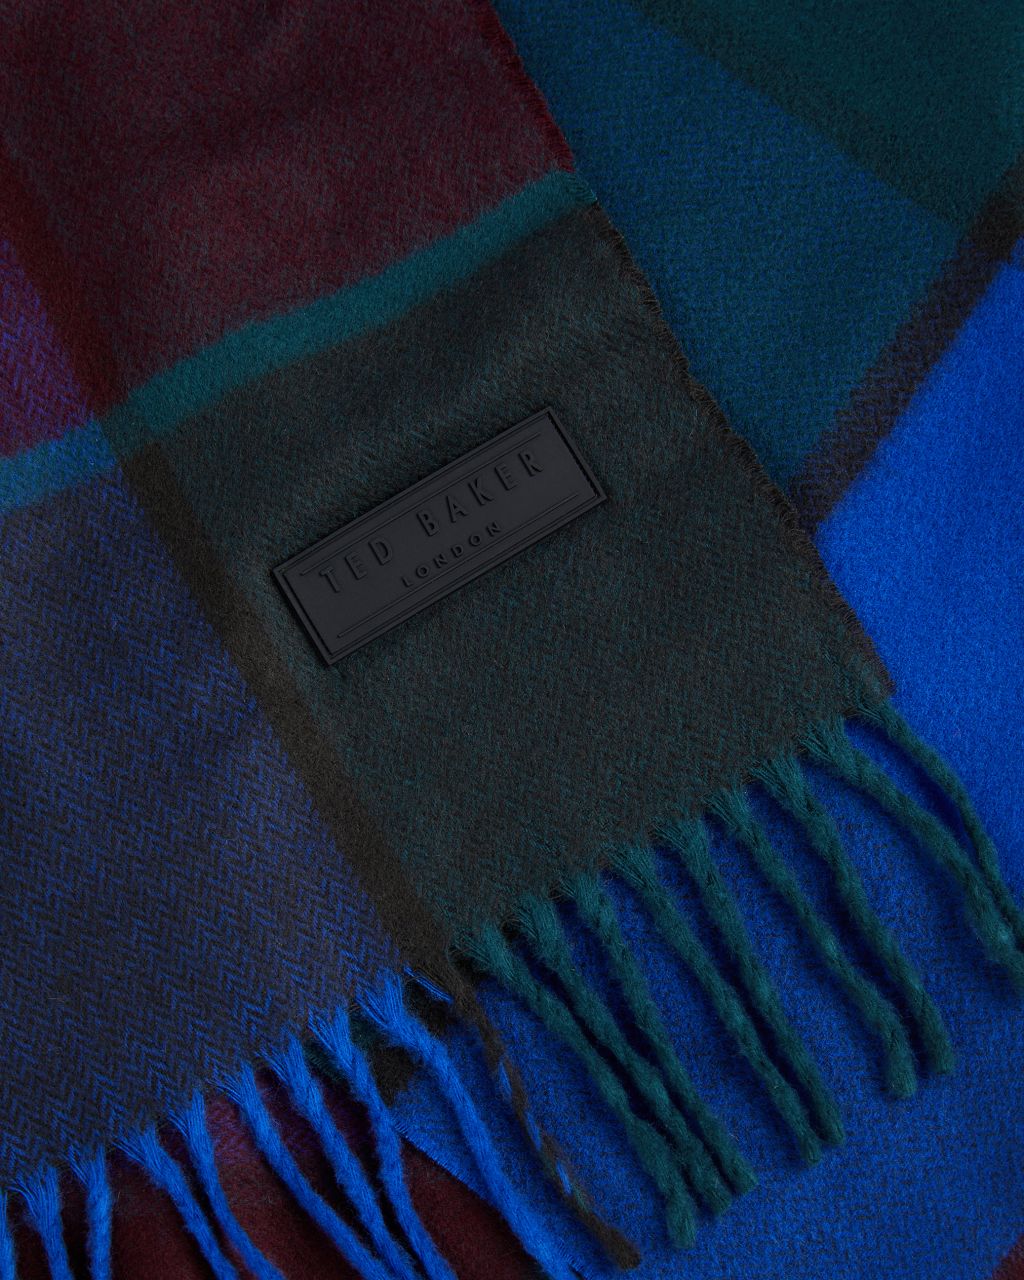 Large Check Scarf